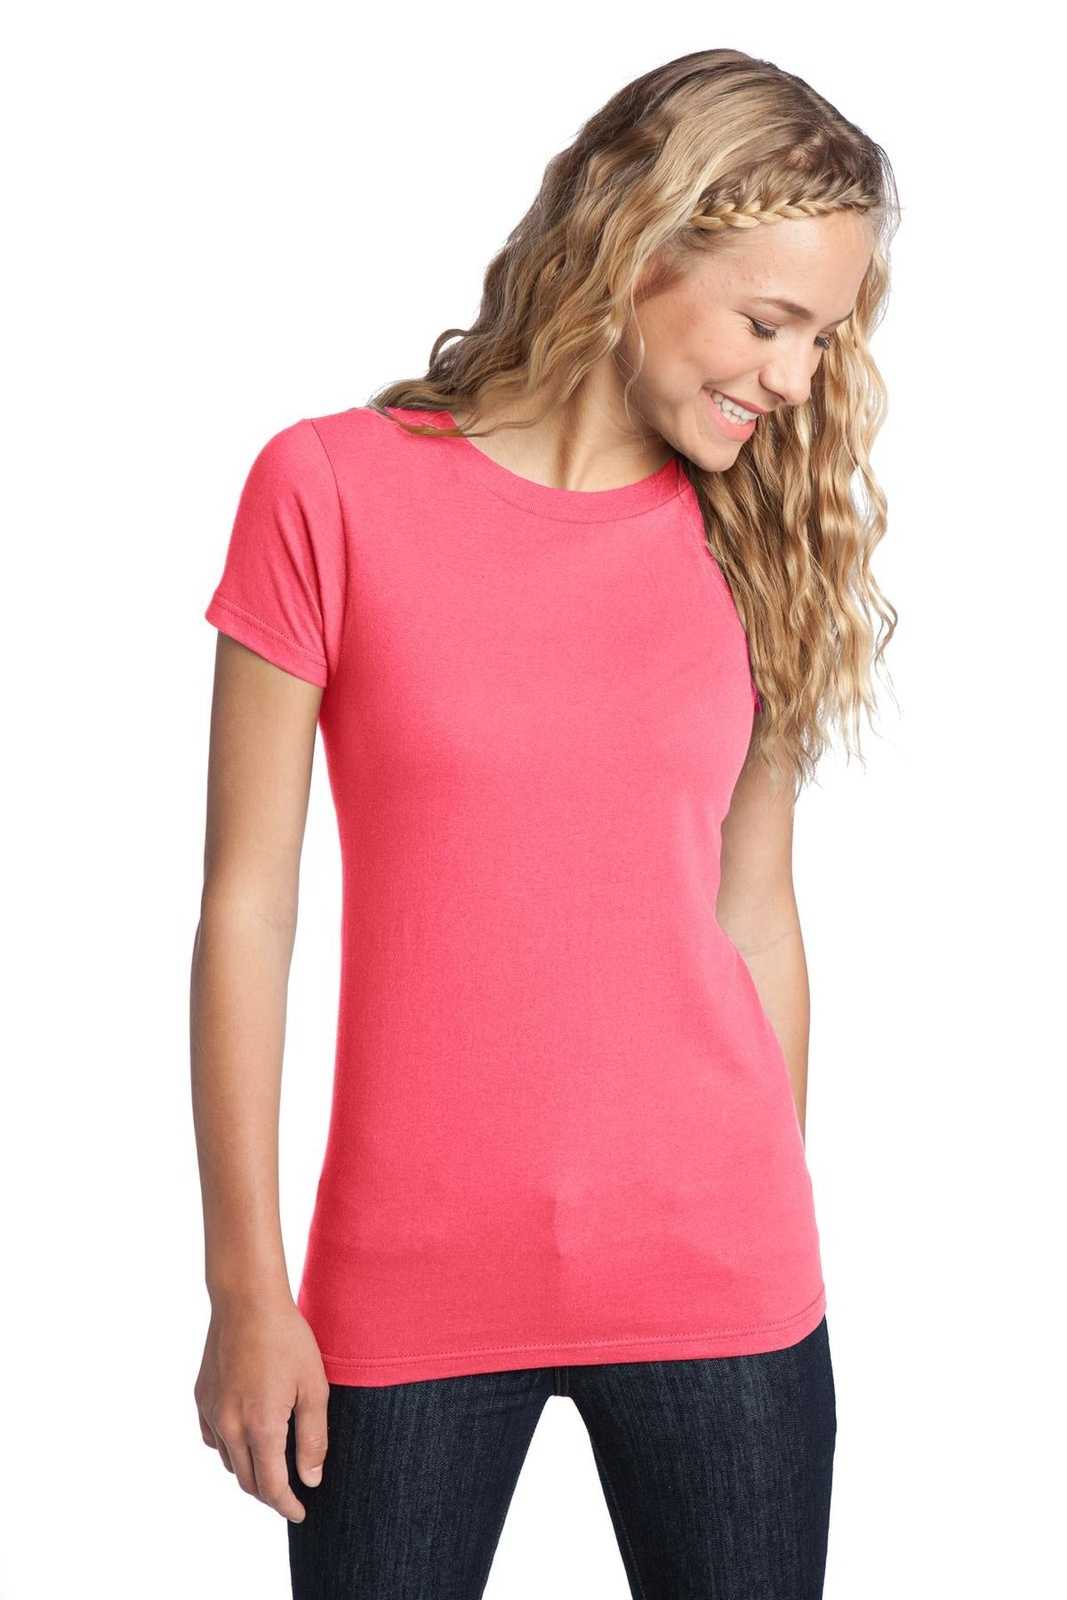 District DT5001 Women's Fitted The Concert Tee - Neon Pink - HIT a Double - 1